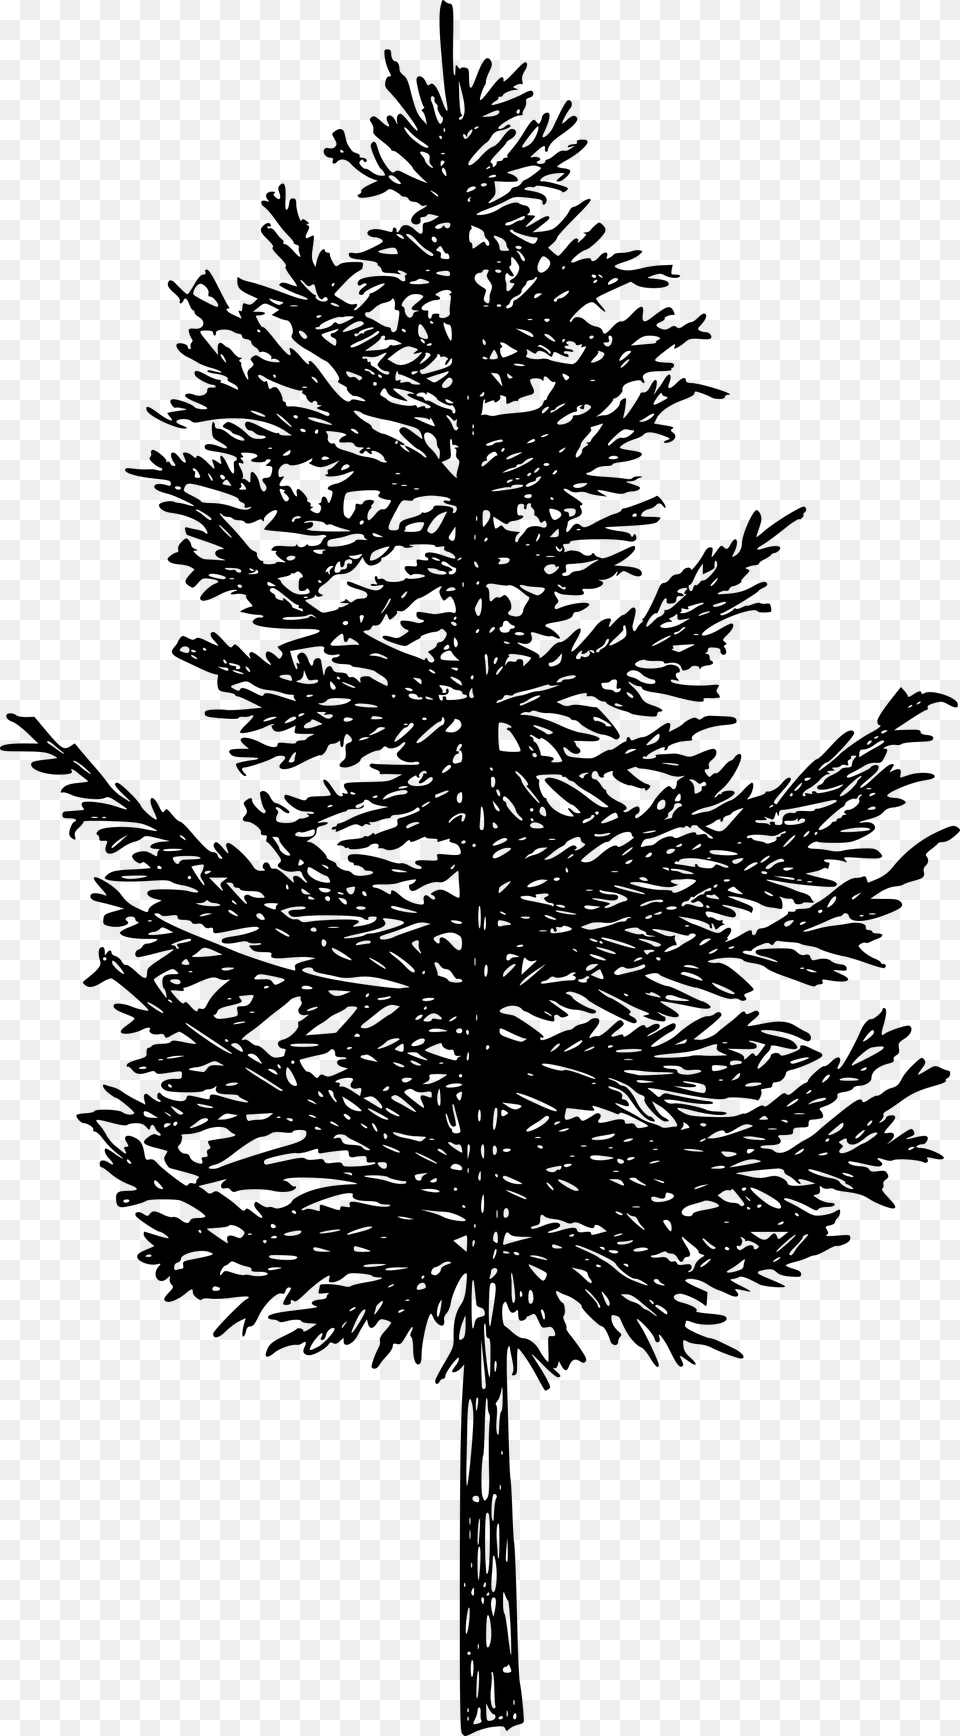 Pine Tree Silhouette Transparent, Gray Png Image